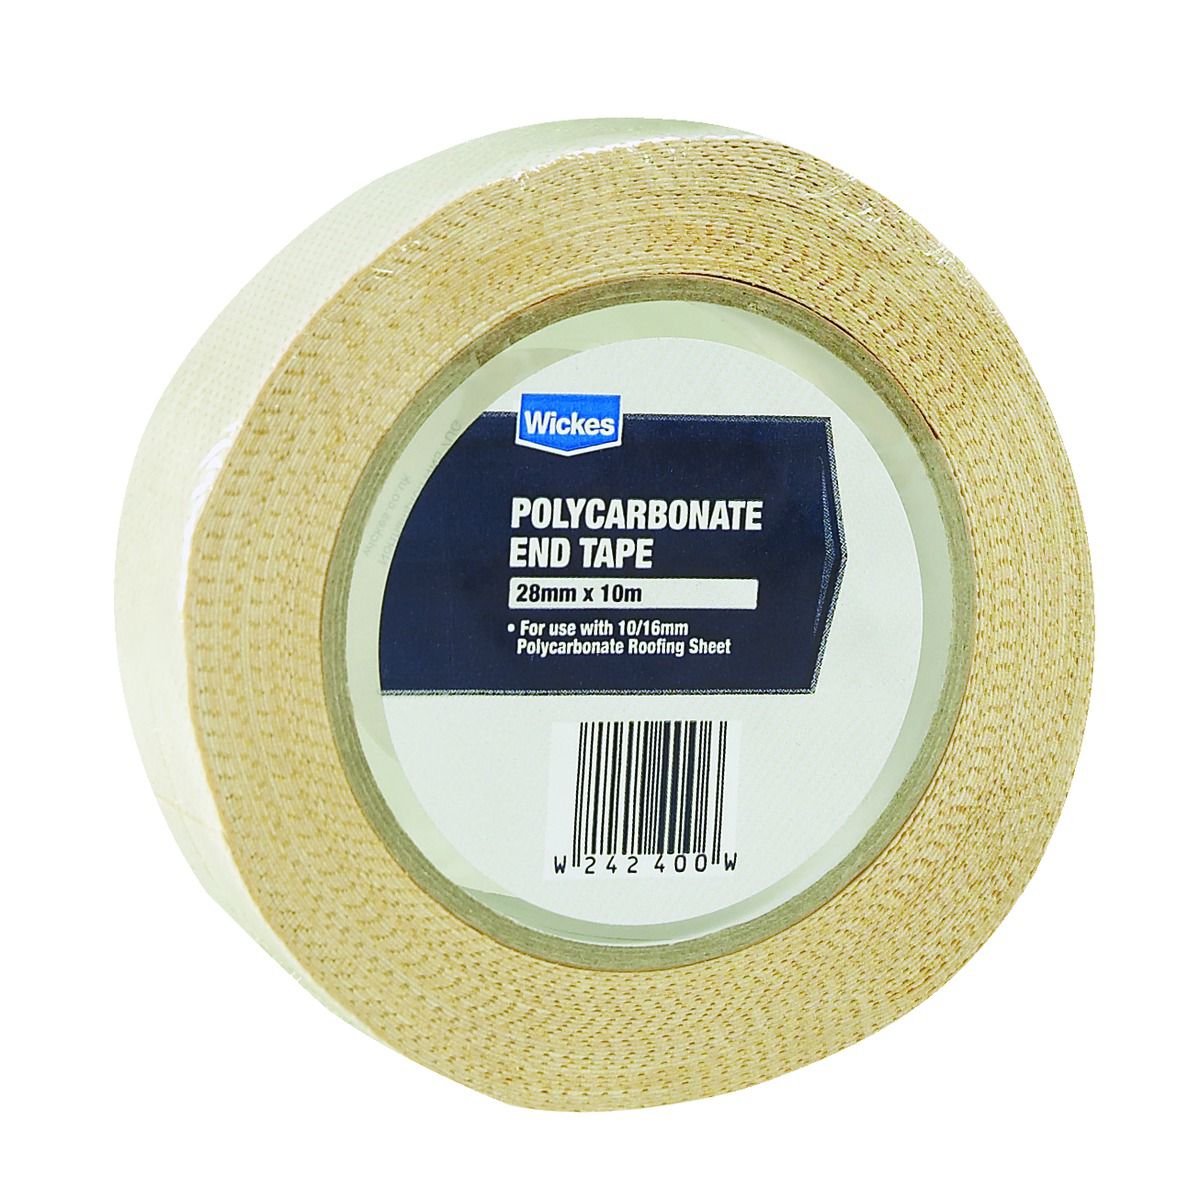 Image of Wickes Anti-Dust Polycarbonate Tape - 28mm x 10m